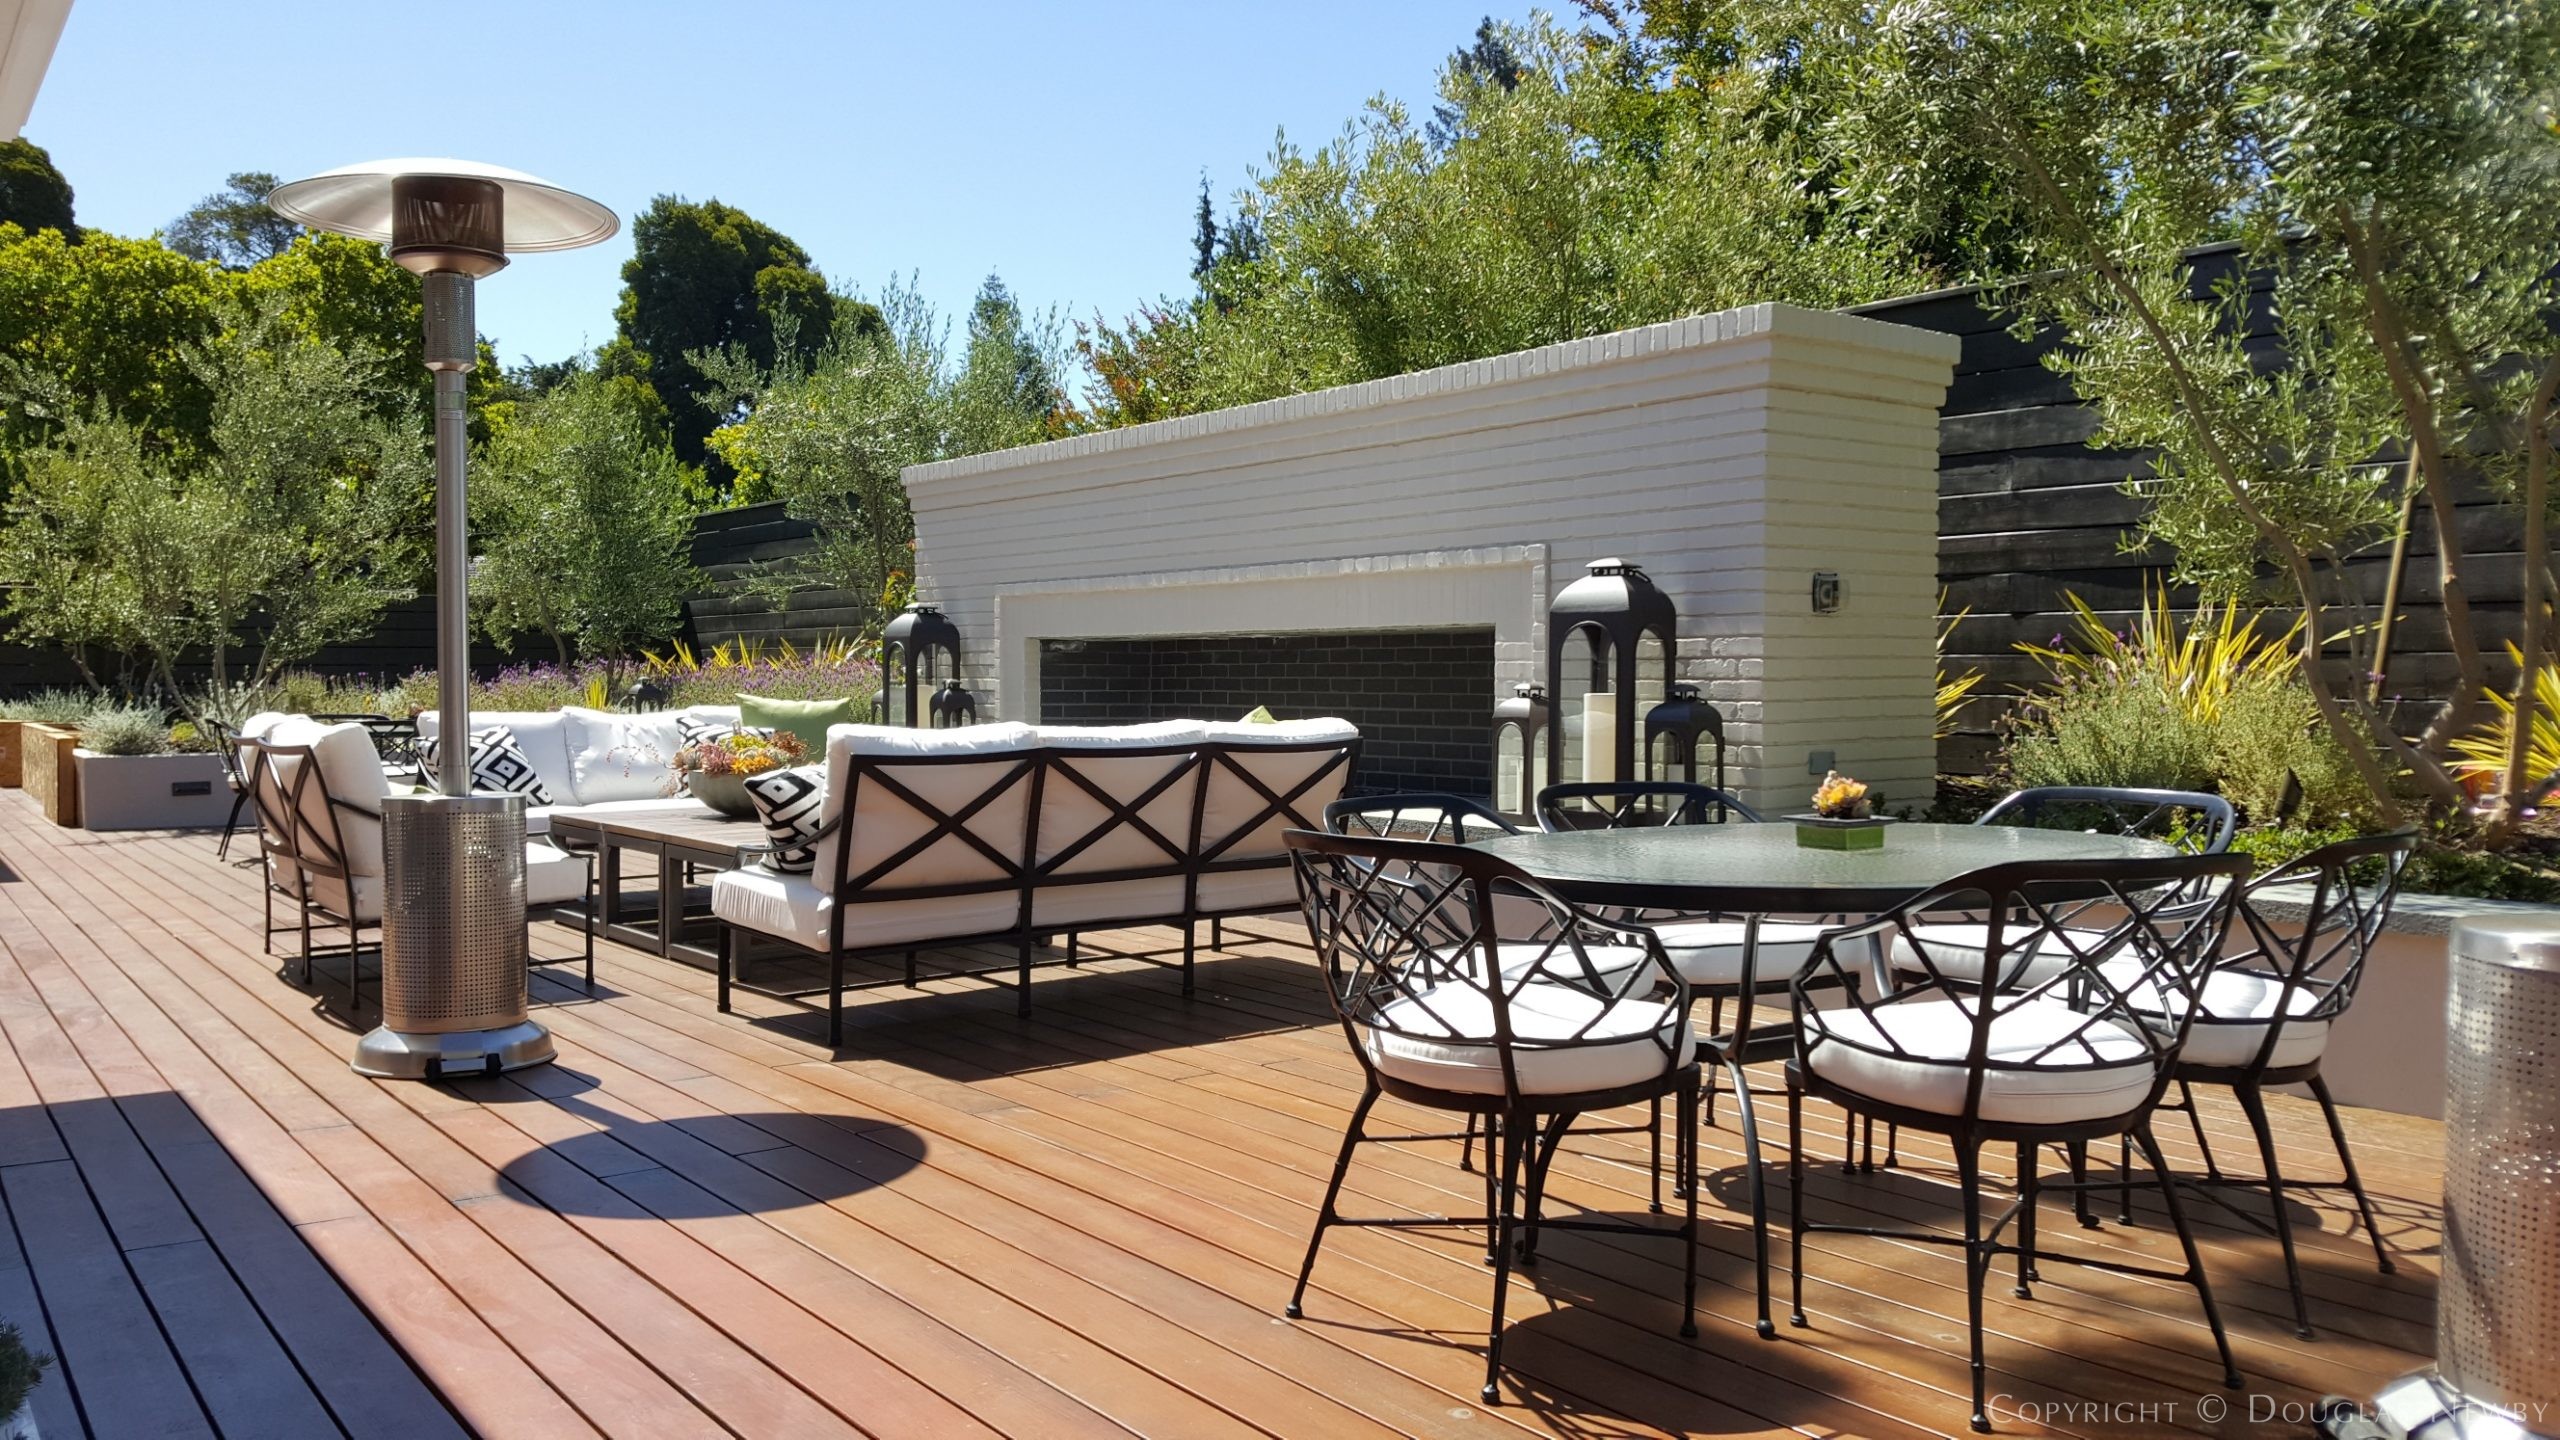 What makes us happy - outdoor living spaces